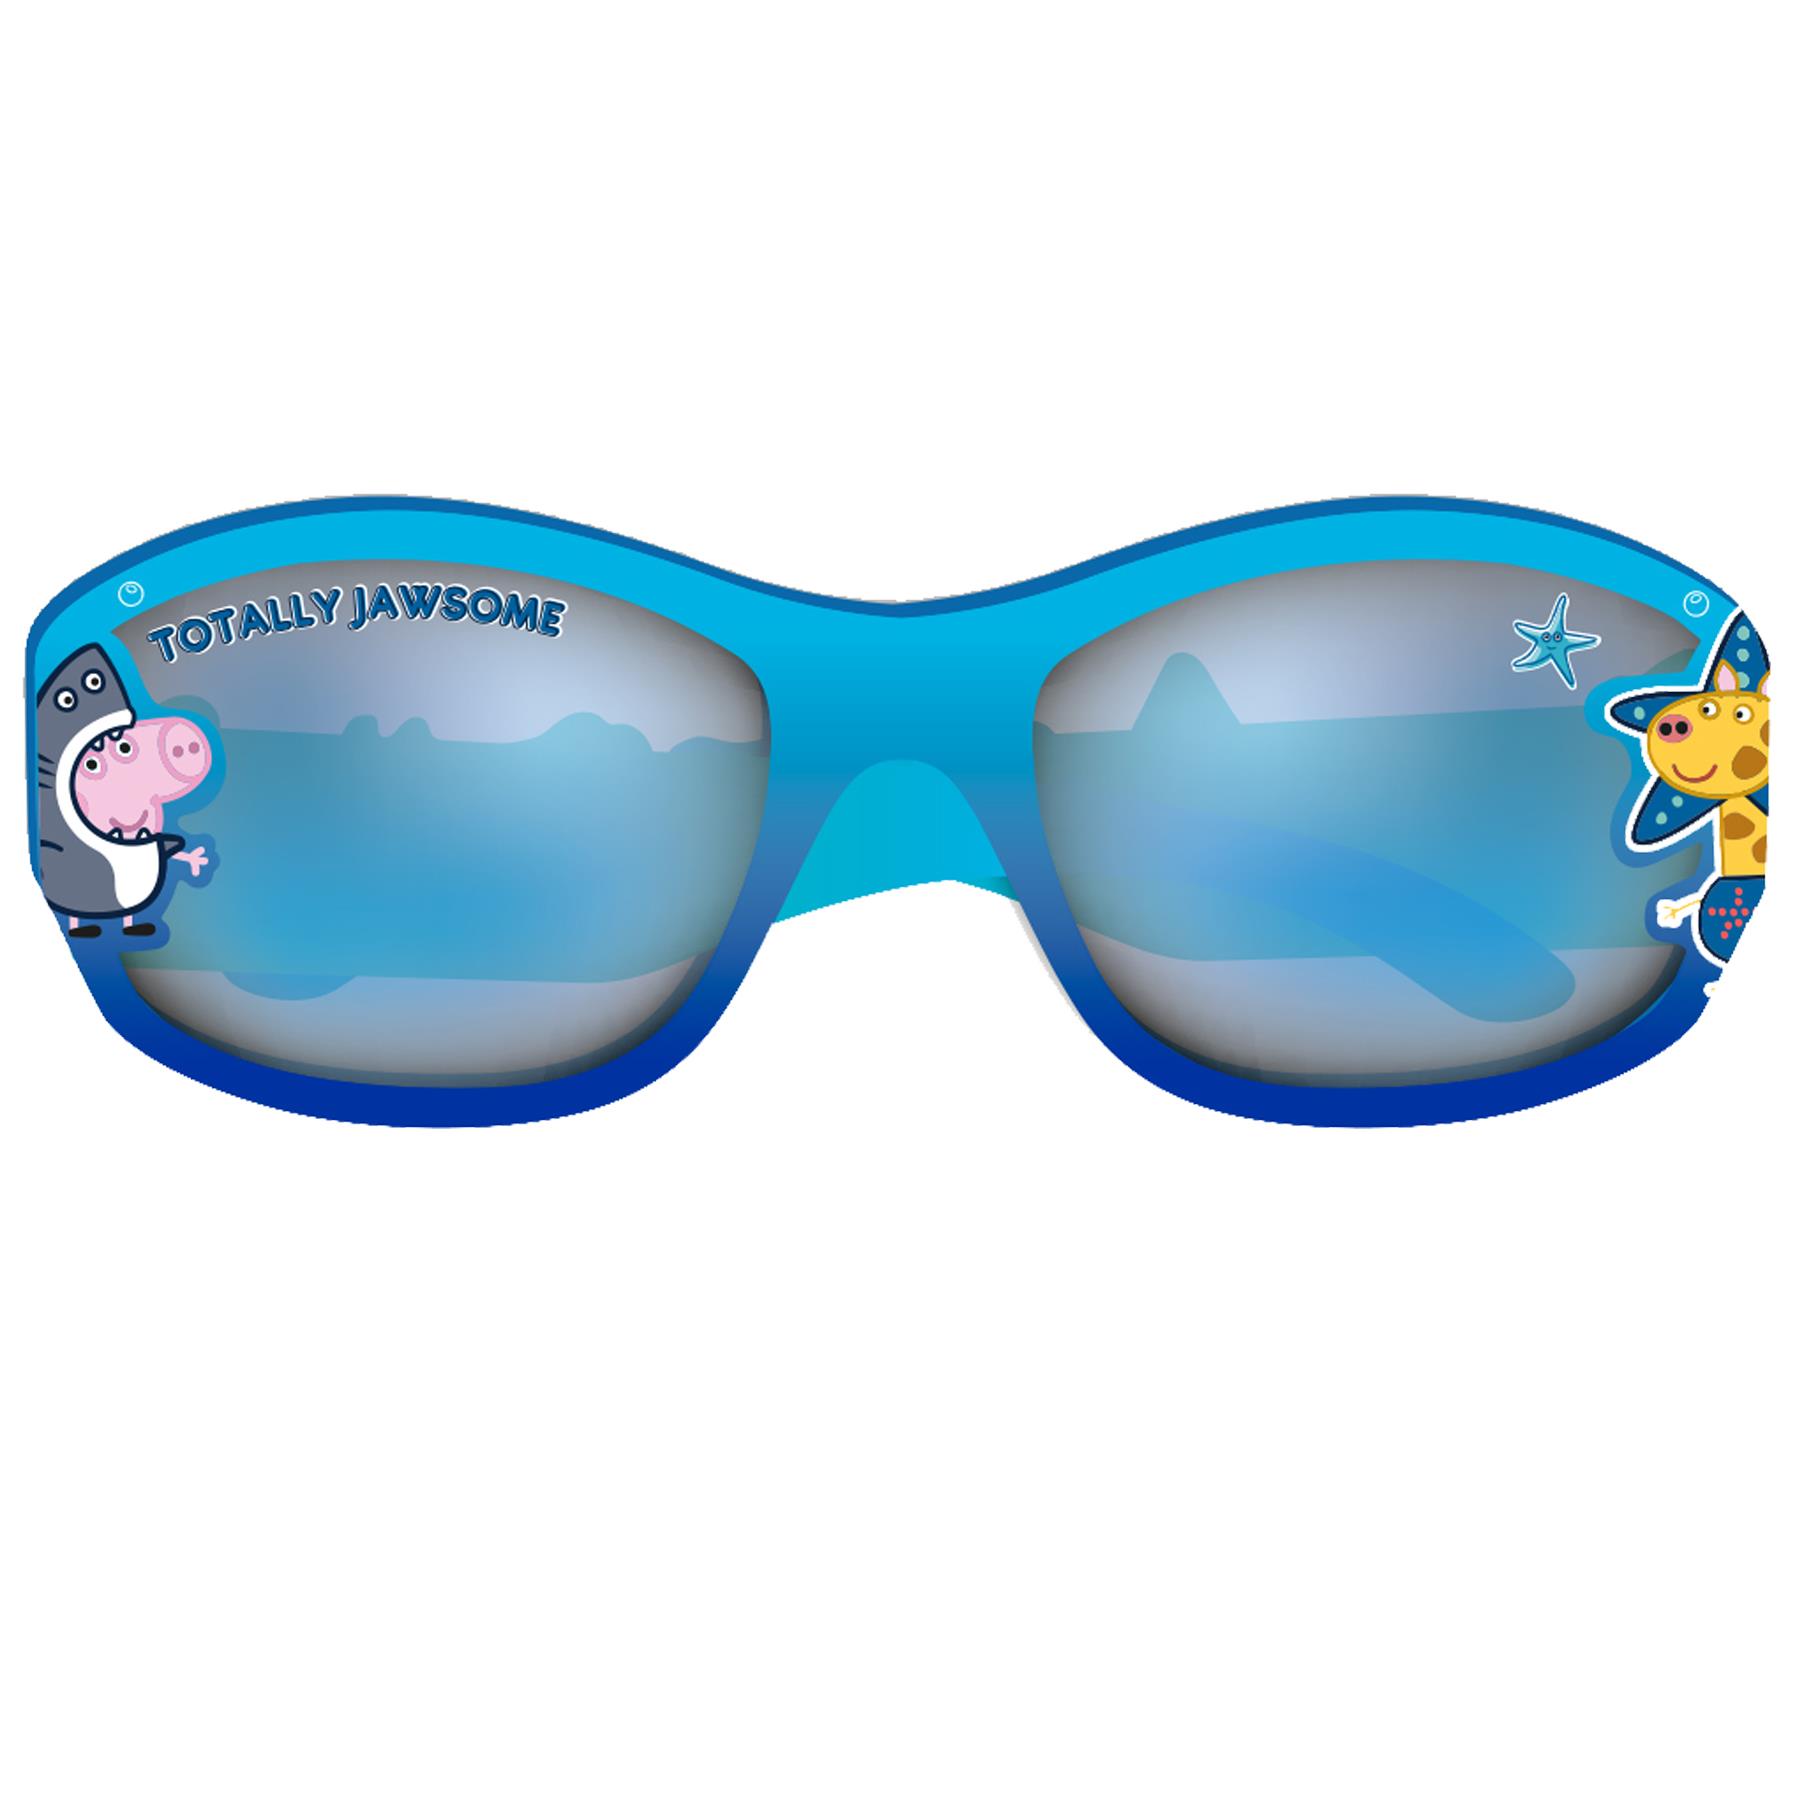 Peppa Pig Children's Character Sunglasses UV protection for Holiday - GEORGE1